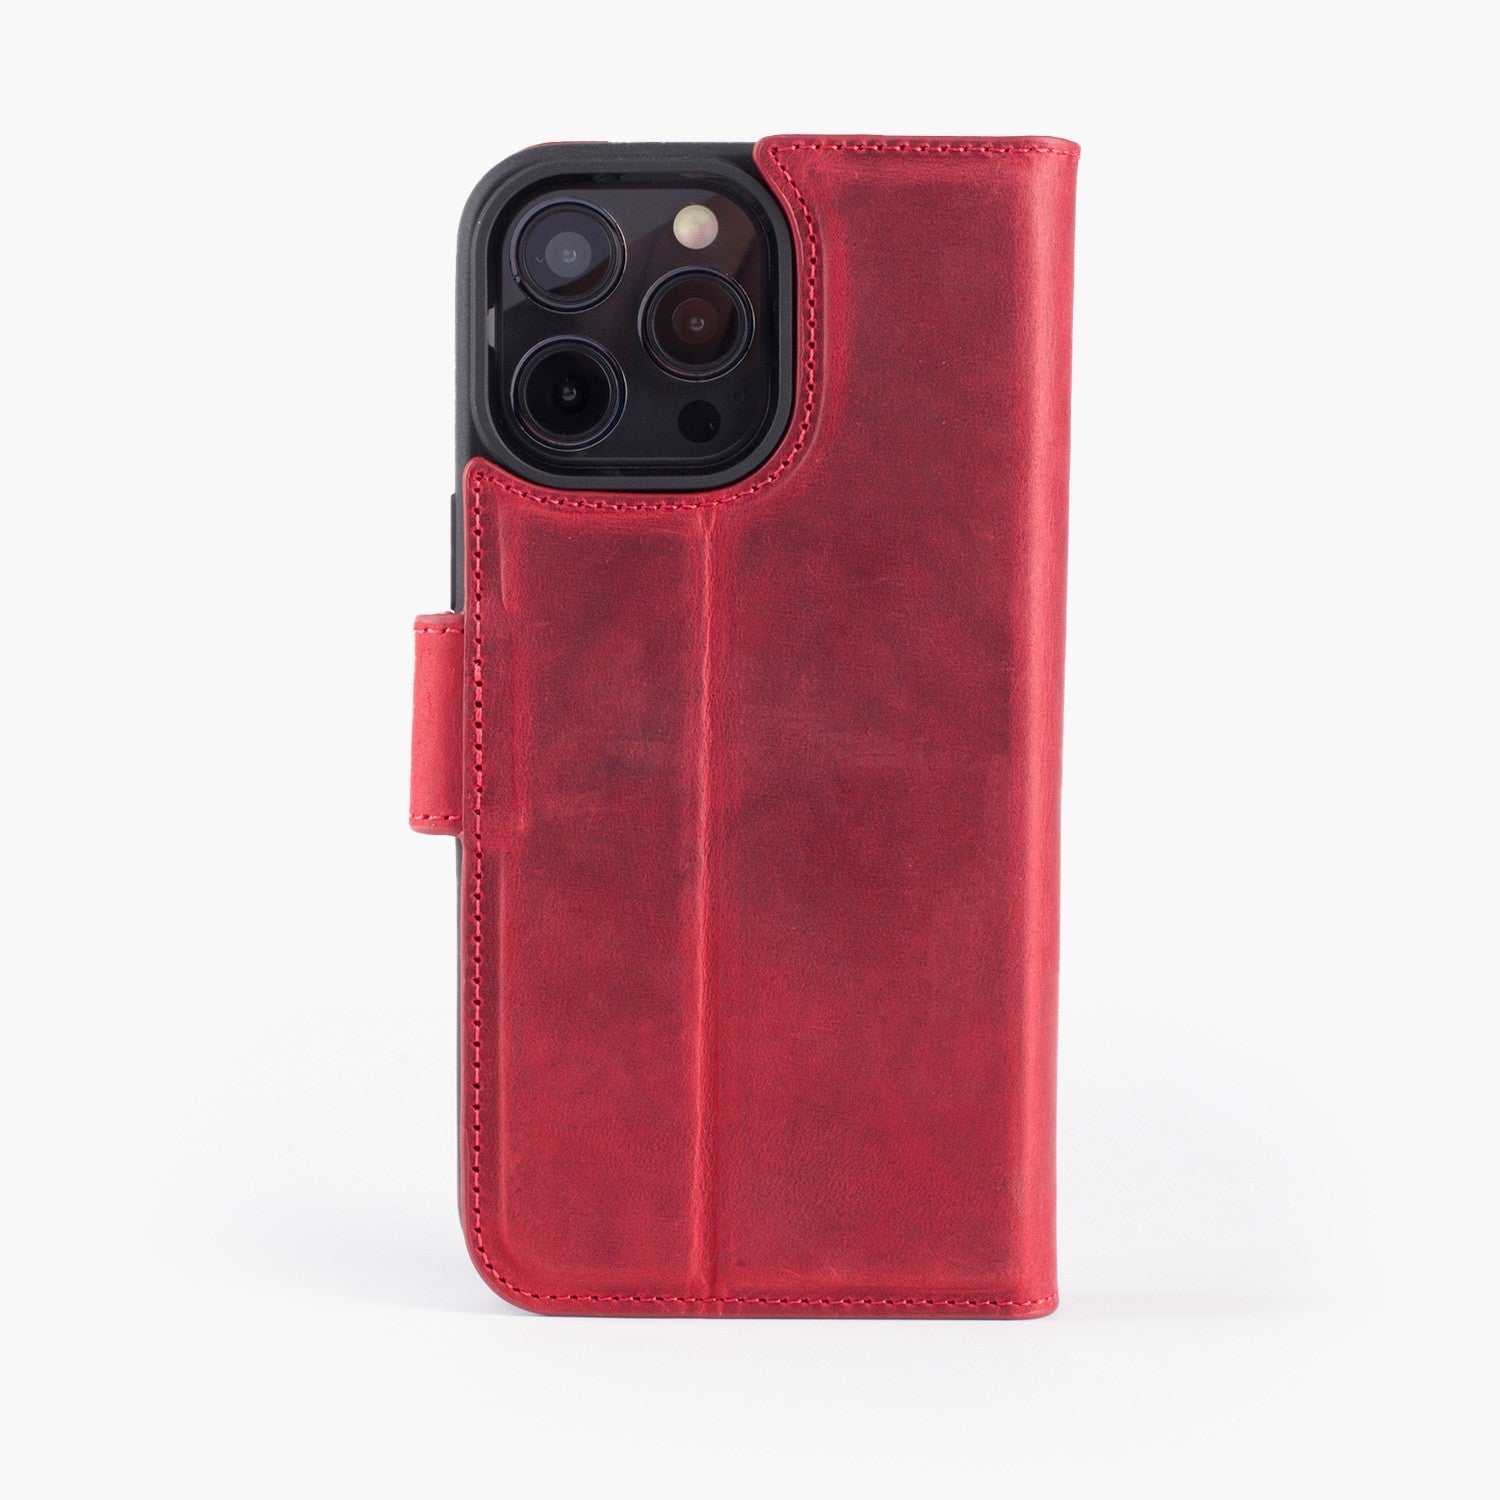 Wachikopa leather Magic Book Case 2 in 1 for iPhone 11 Pro Max Red